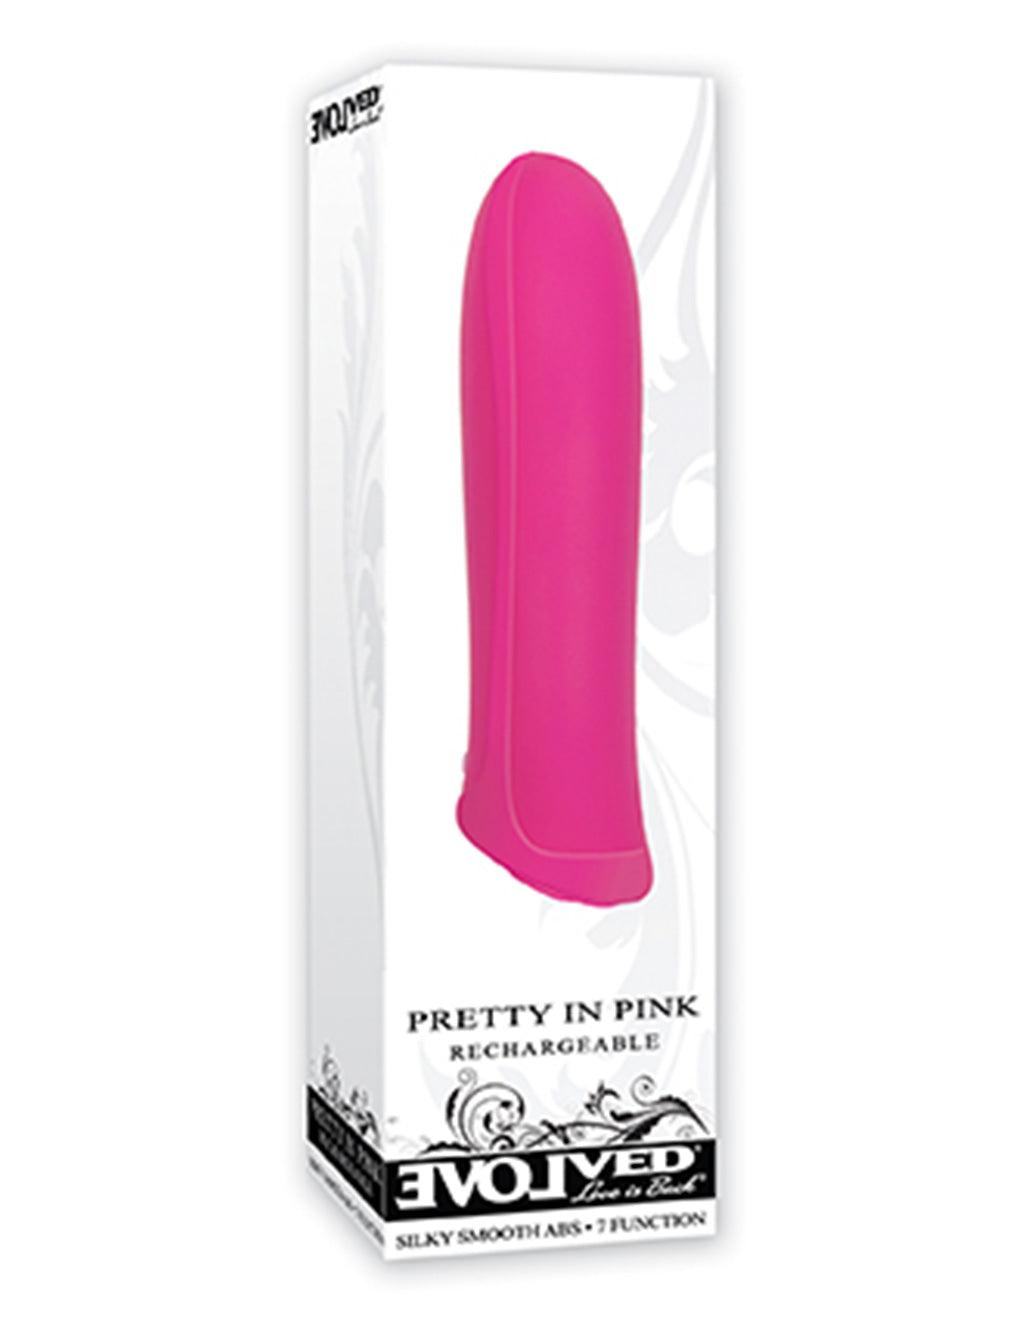 Evolved Pretty In Pink Vibrator- package